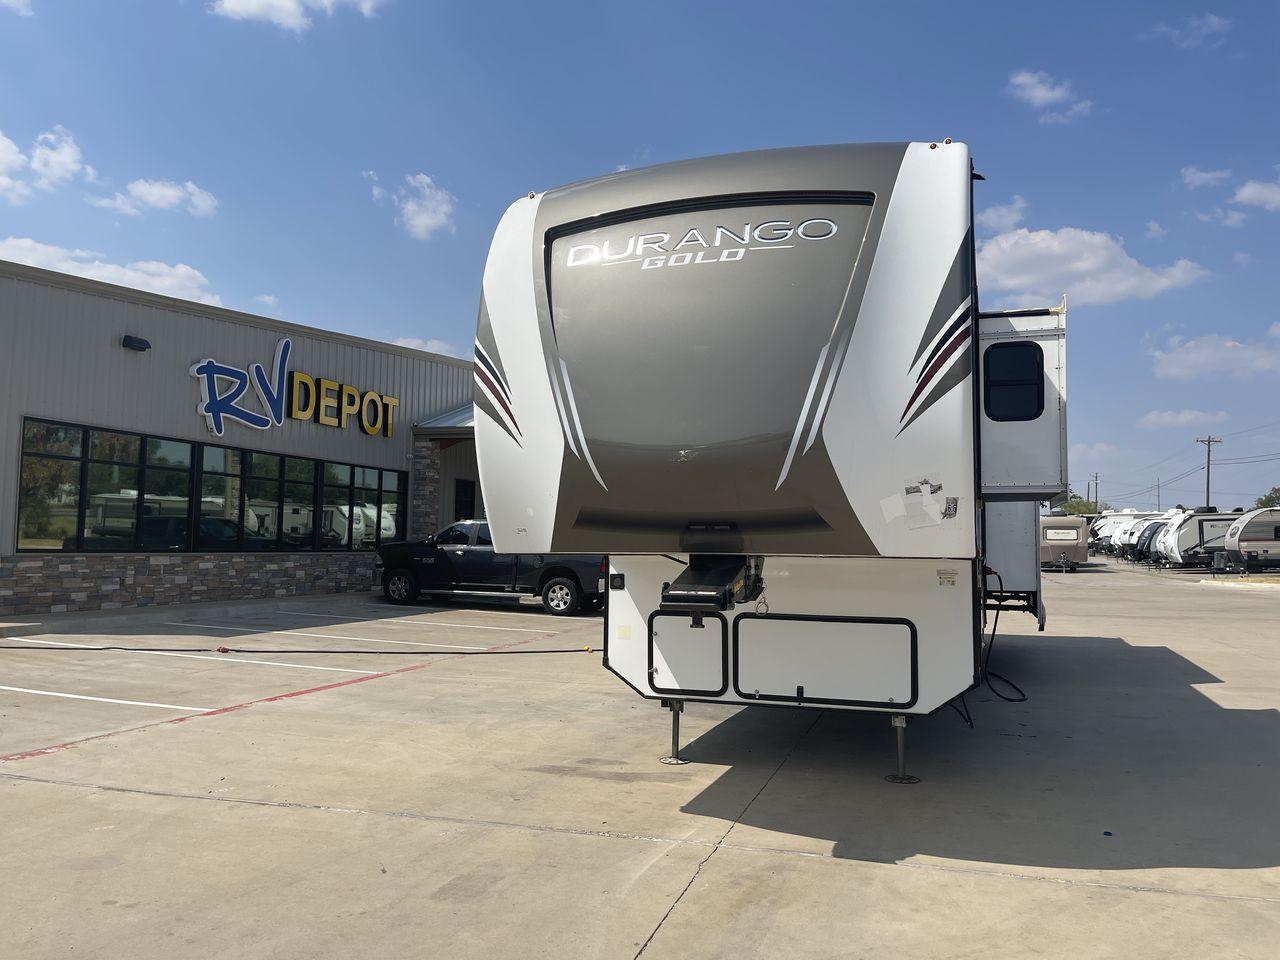 2020 K-Z DURANGO GOLD 366FBT (4EZFV4026L6) , Length: 39.83 ft. | Dry Weight: 11,470 lbs. | Gross Weight: 14,500 lbs. | Slides: 3 transmission, located at 4319 N Main St, Cleburne, TX, 76033, (817) 678-5133, 32.385960, -97.391212 - Travel and enjoy the luxuries this 2020 K-Z Durango Gold 366FBT has to offer! This fifth wheel measures almost 40 feet long and 13.5 feet tall. It has a dry weight of 11,470 pounds as well as a GVWR of 14,500 pounds. It comes equipped with three power slides and an 18-foot power awning. This unit is - Photo #1